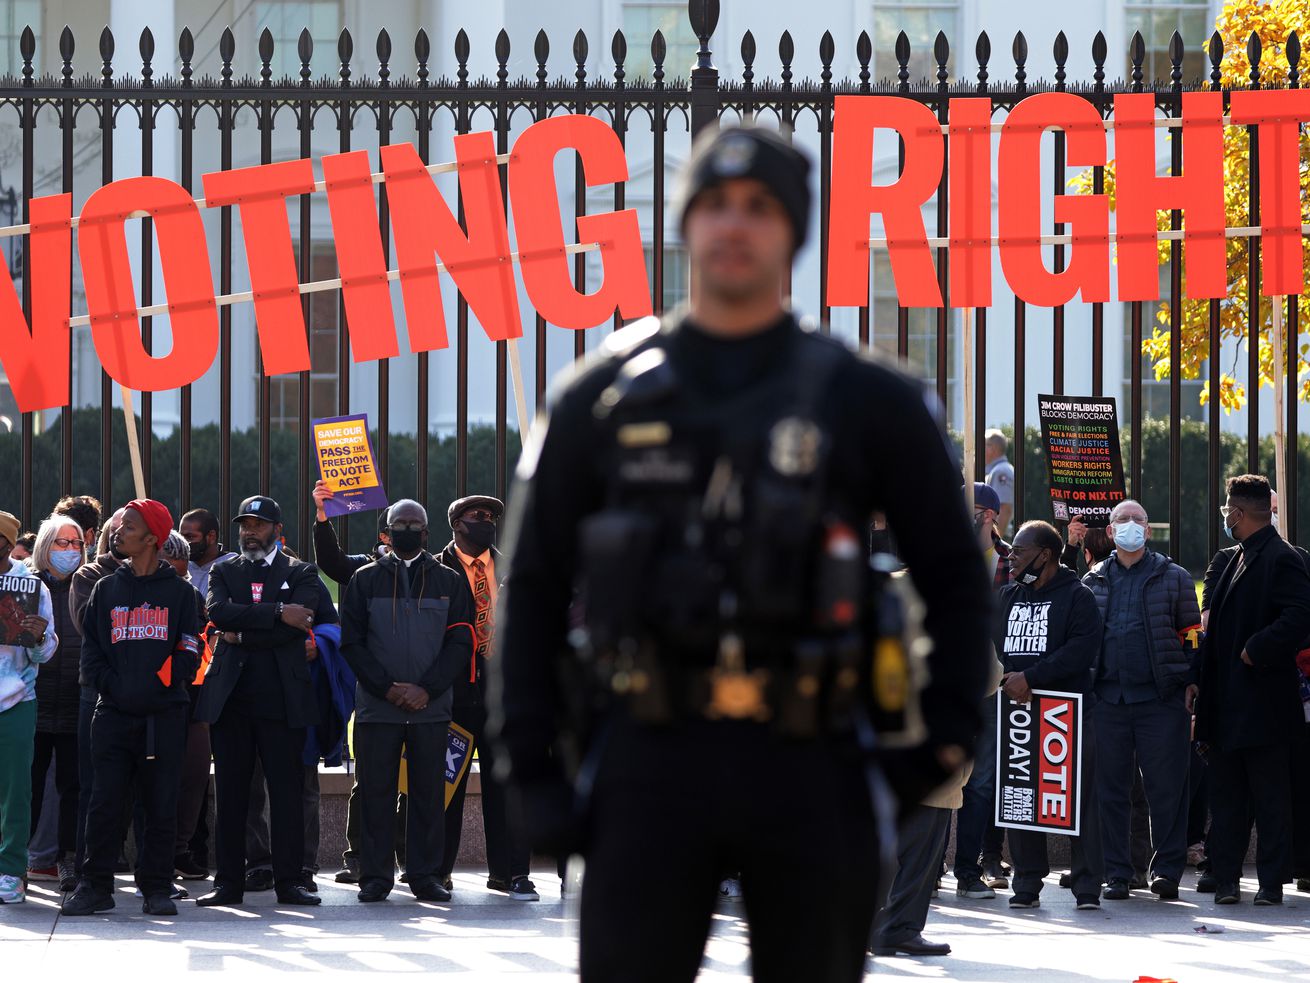 Will voter suppression be a problem in the midterm elections?